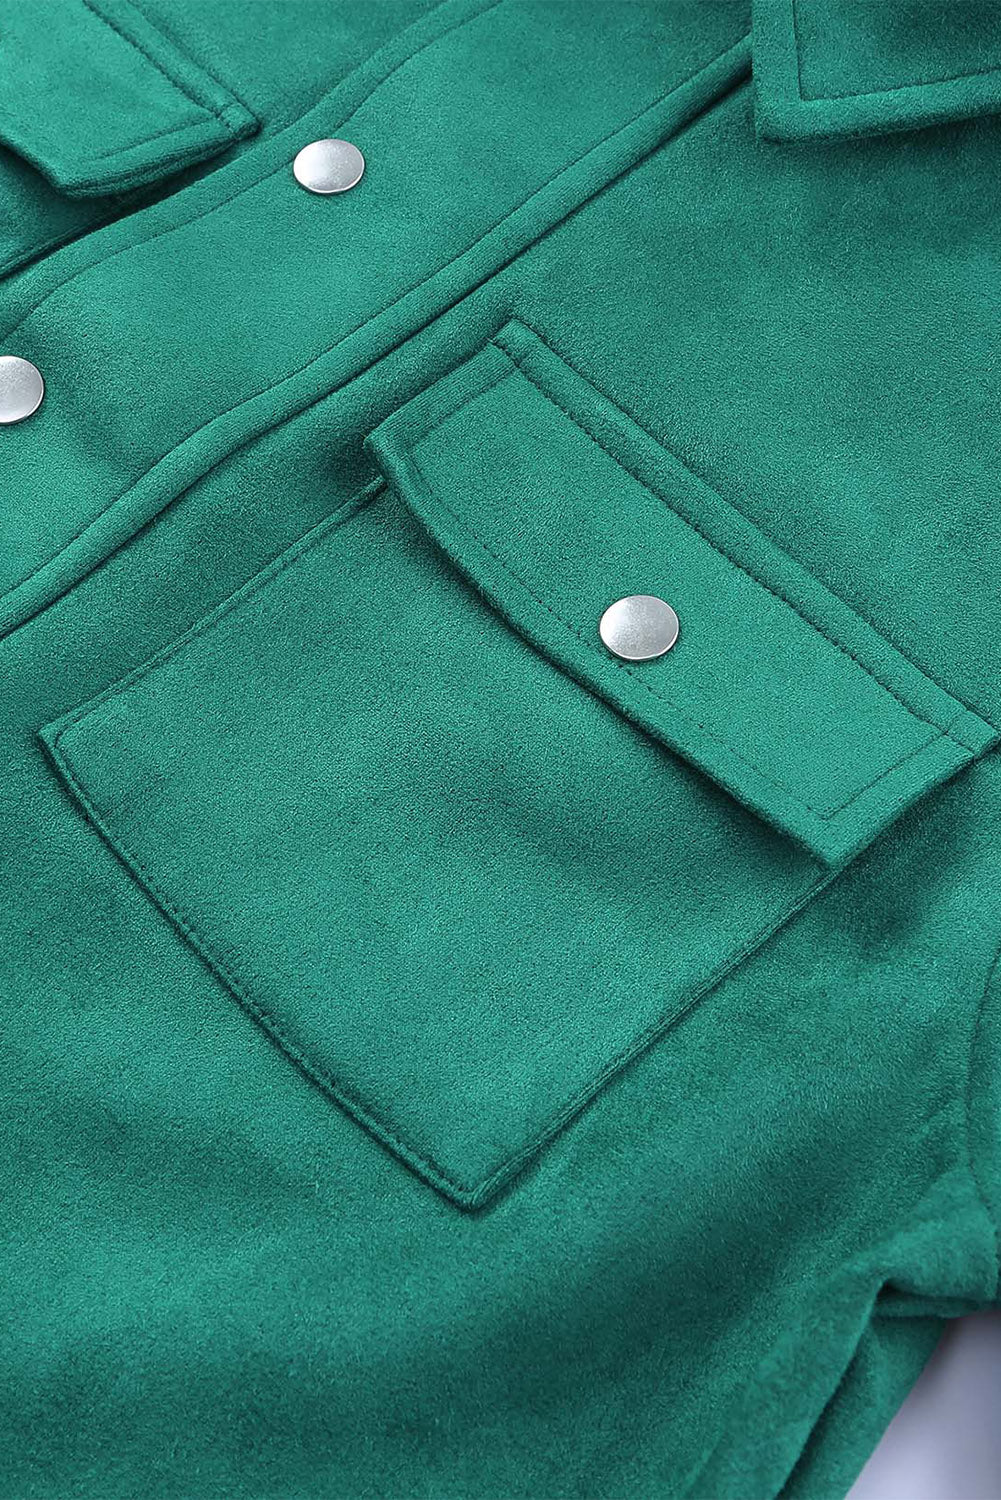 Green Faux Suede Button Down Cropped Jacket